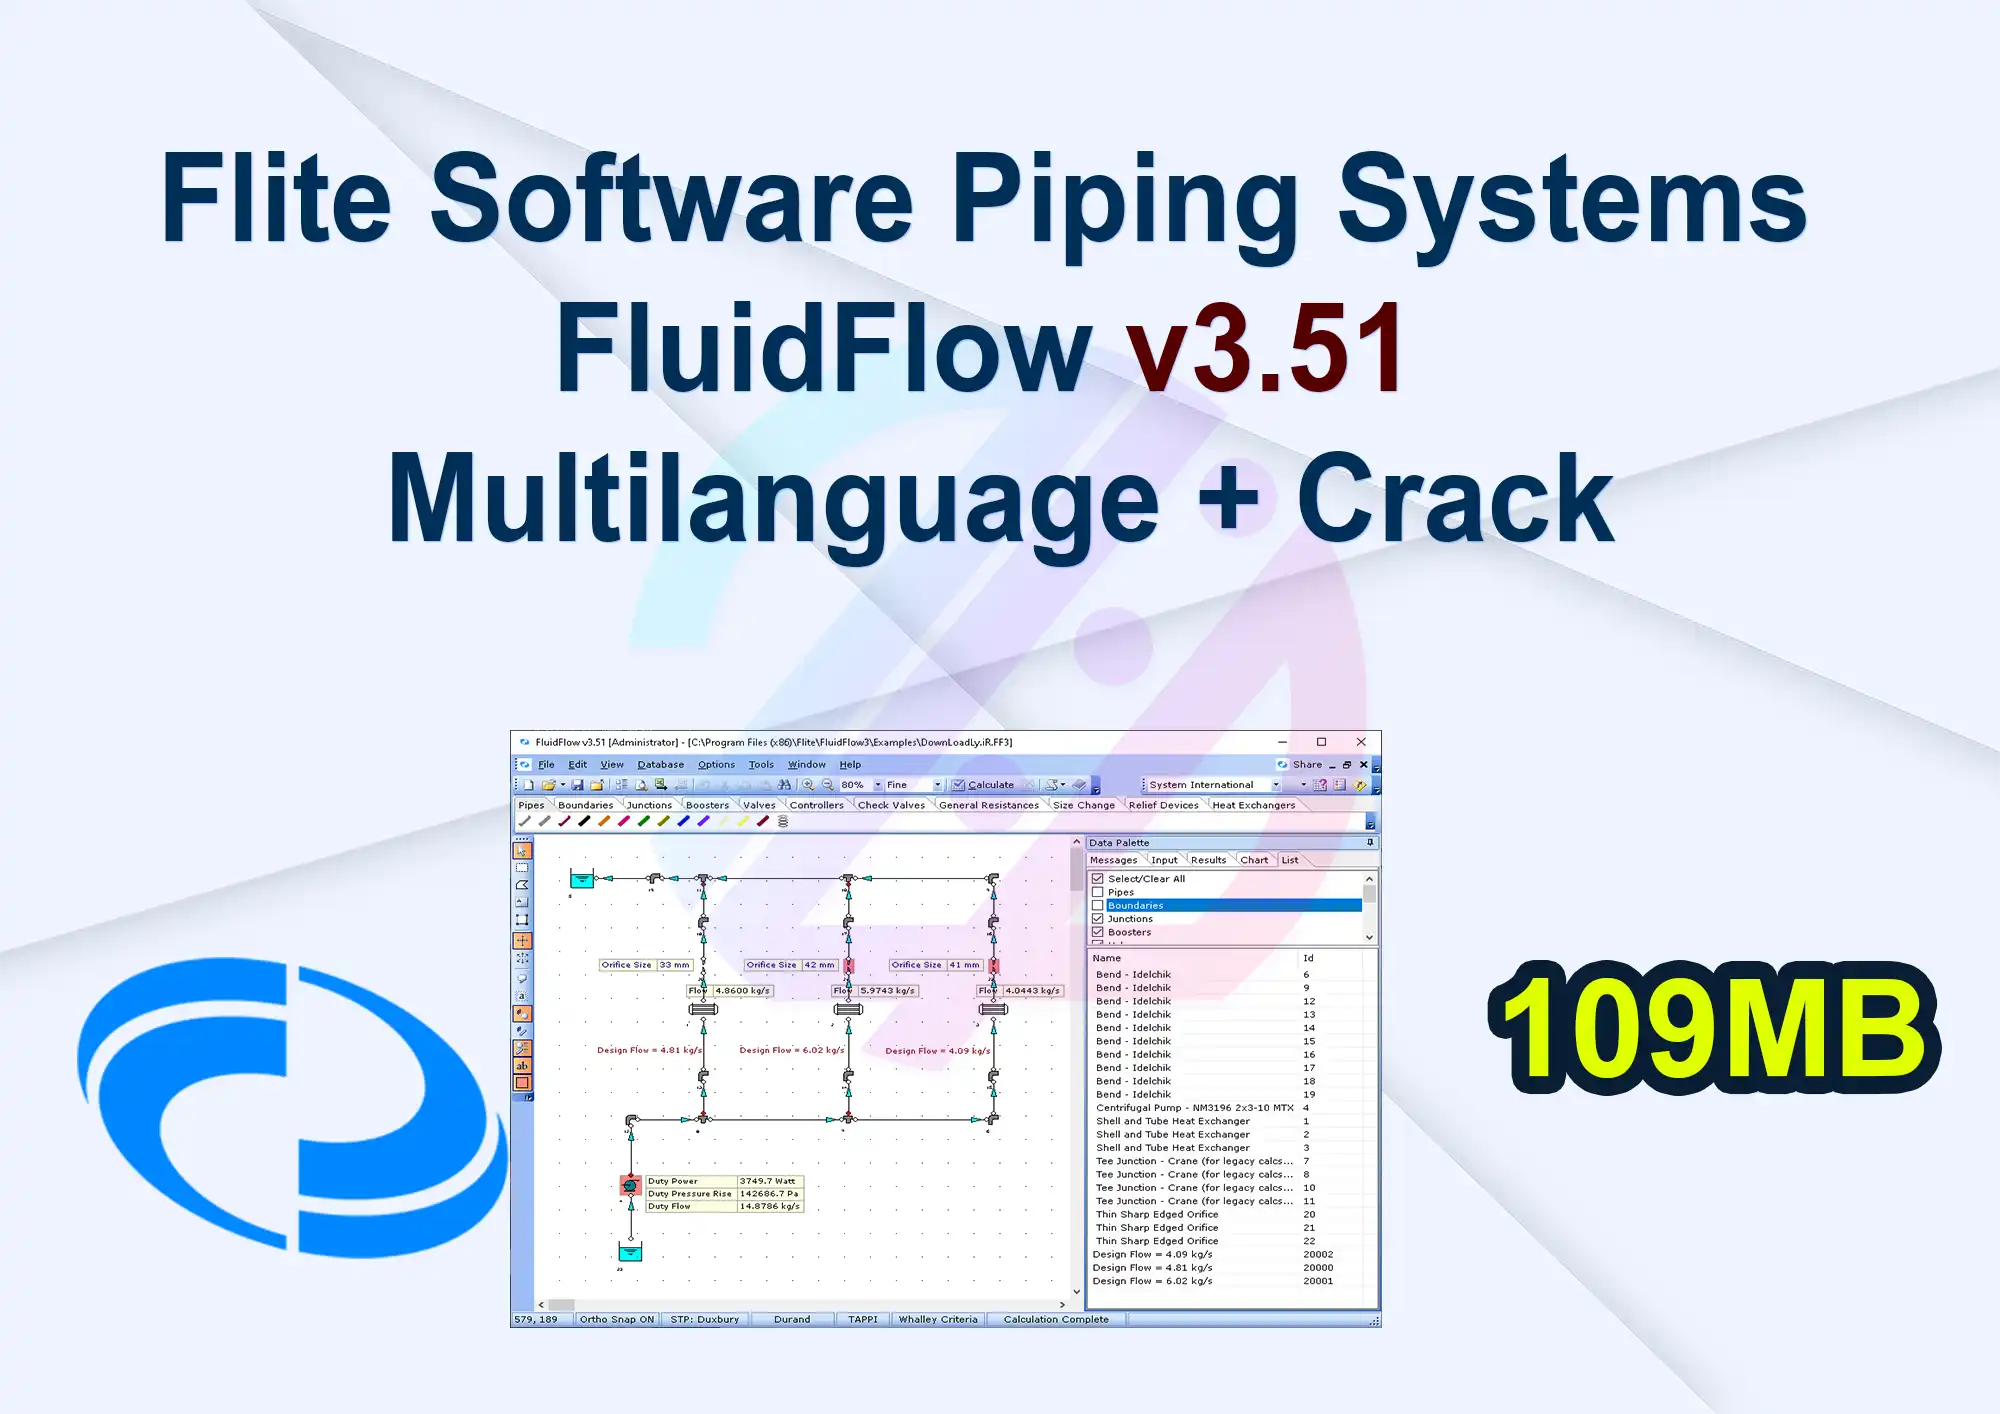 Flite Software Piping Systems FluidFlow v3.51 Multilanguage + Crack